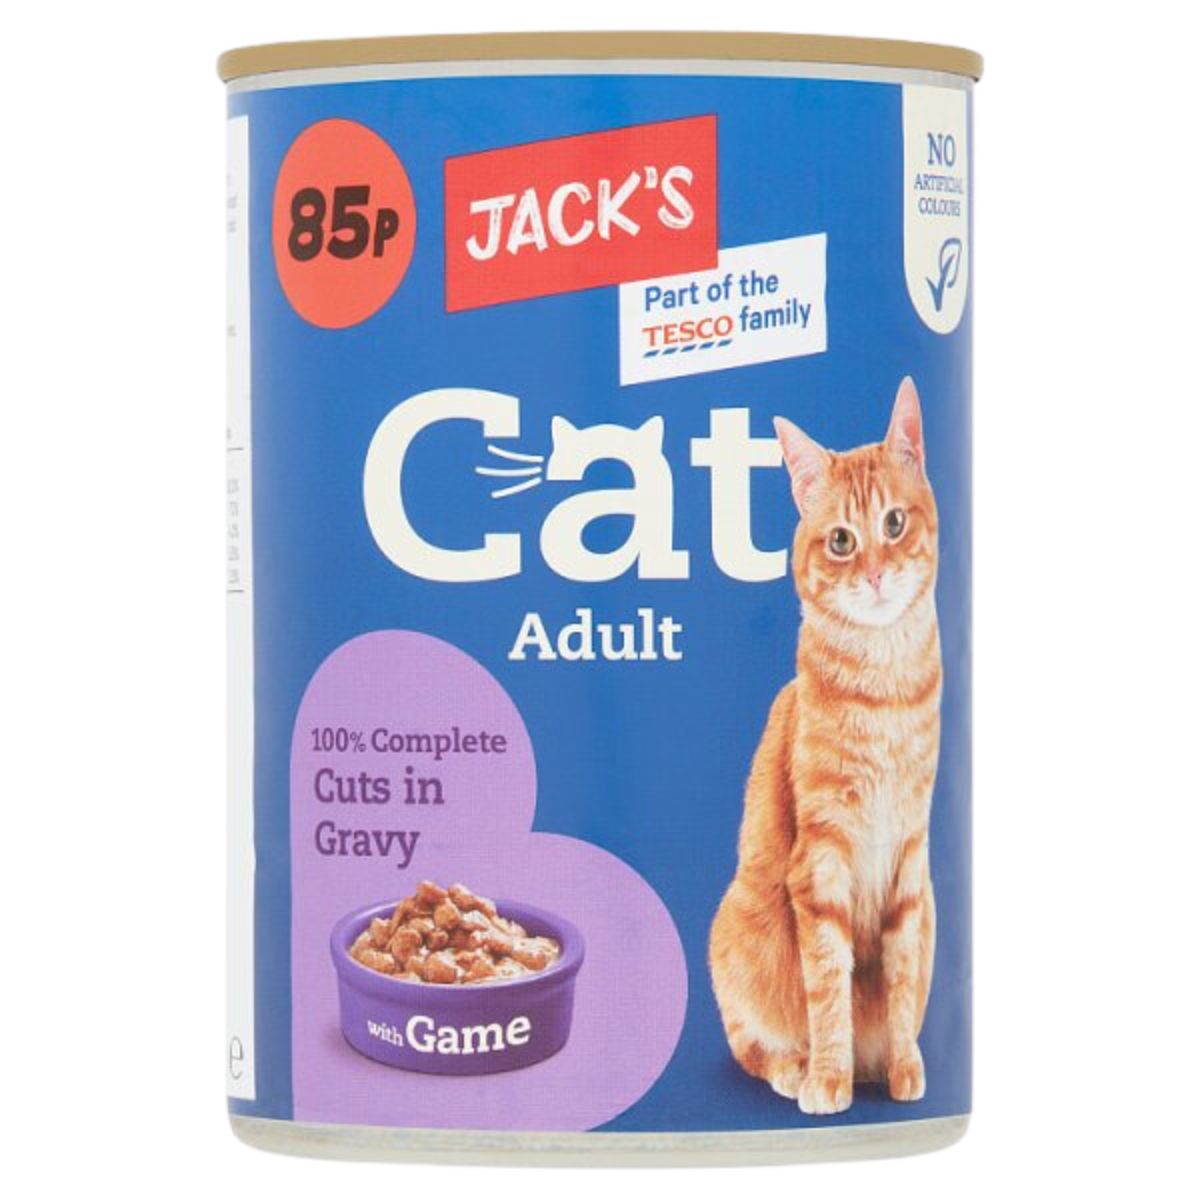 Jacks - Cat Adult Cuts in Gravy with Game - 415g canned food.